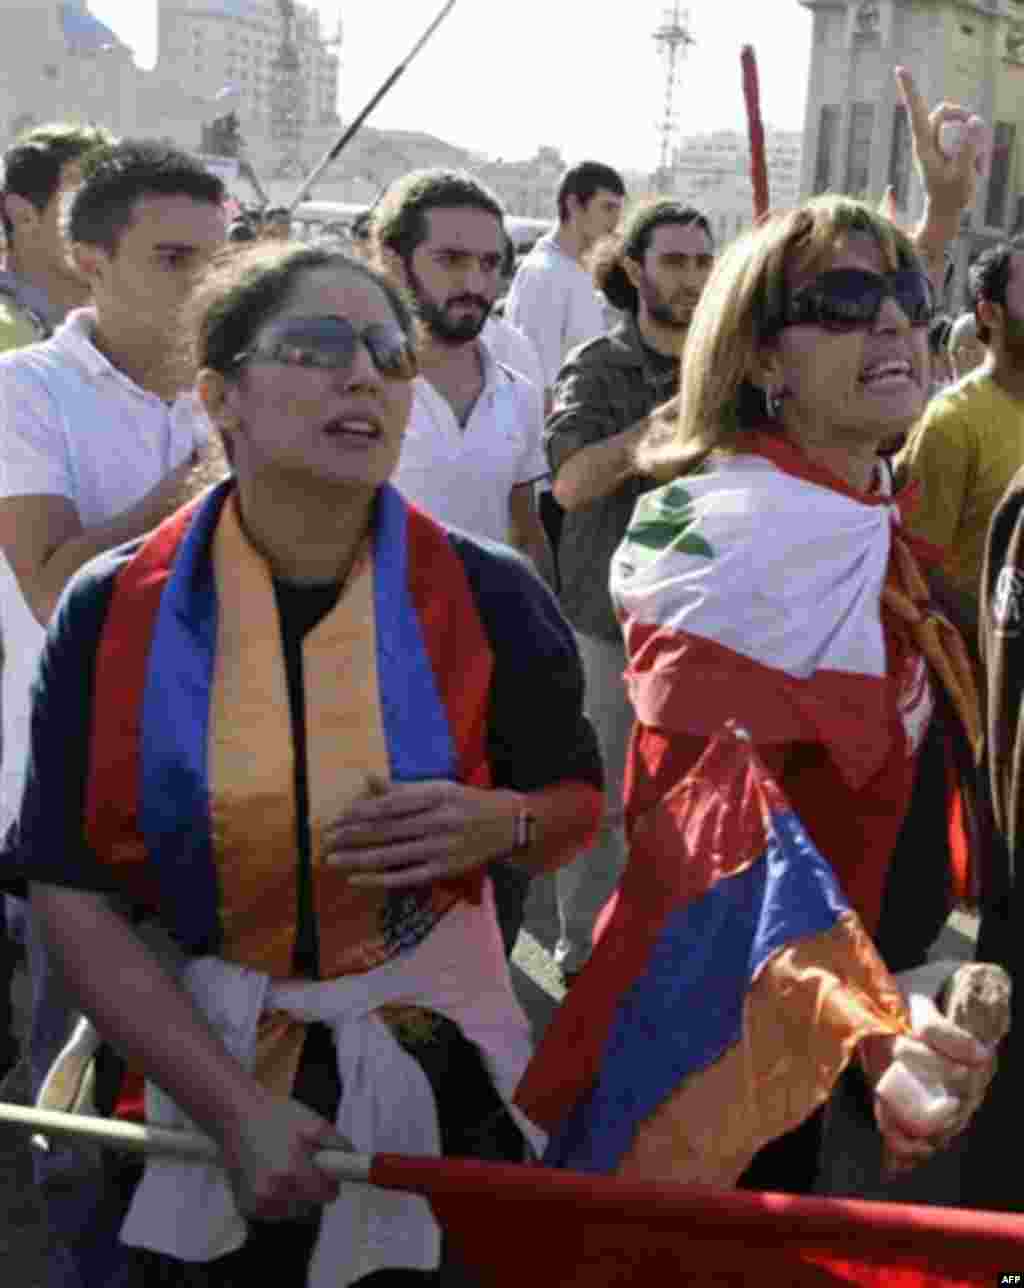 Lebanese women of Armenian descent react during a protest against the visit of Turkish Prime Minister Recep Tayyip Erdogan in Beirut's Martyrs' Square, Lebanon, Thursday, Nov. 25, 2010. Armenians accuse Turkey of mass ethnic killings early last century. (